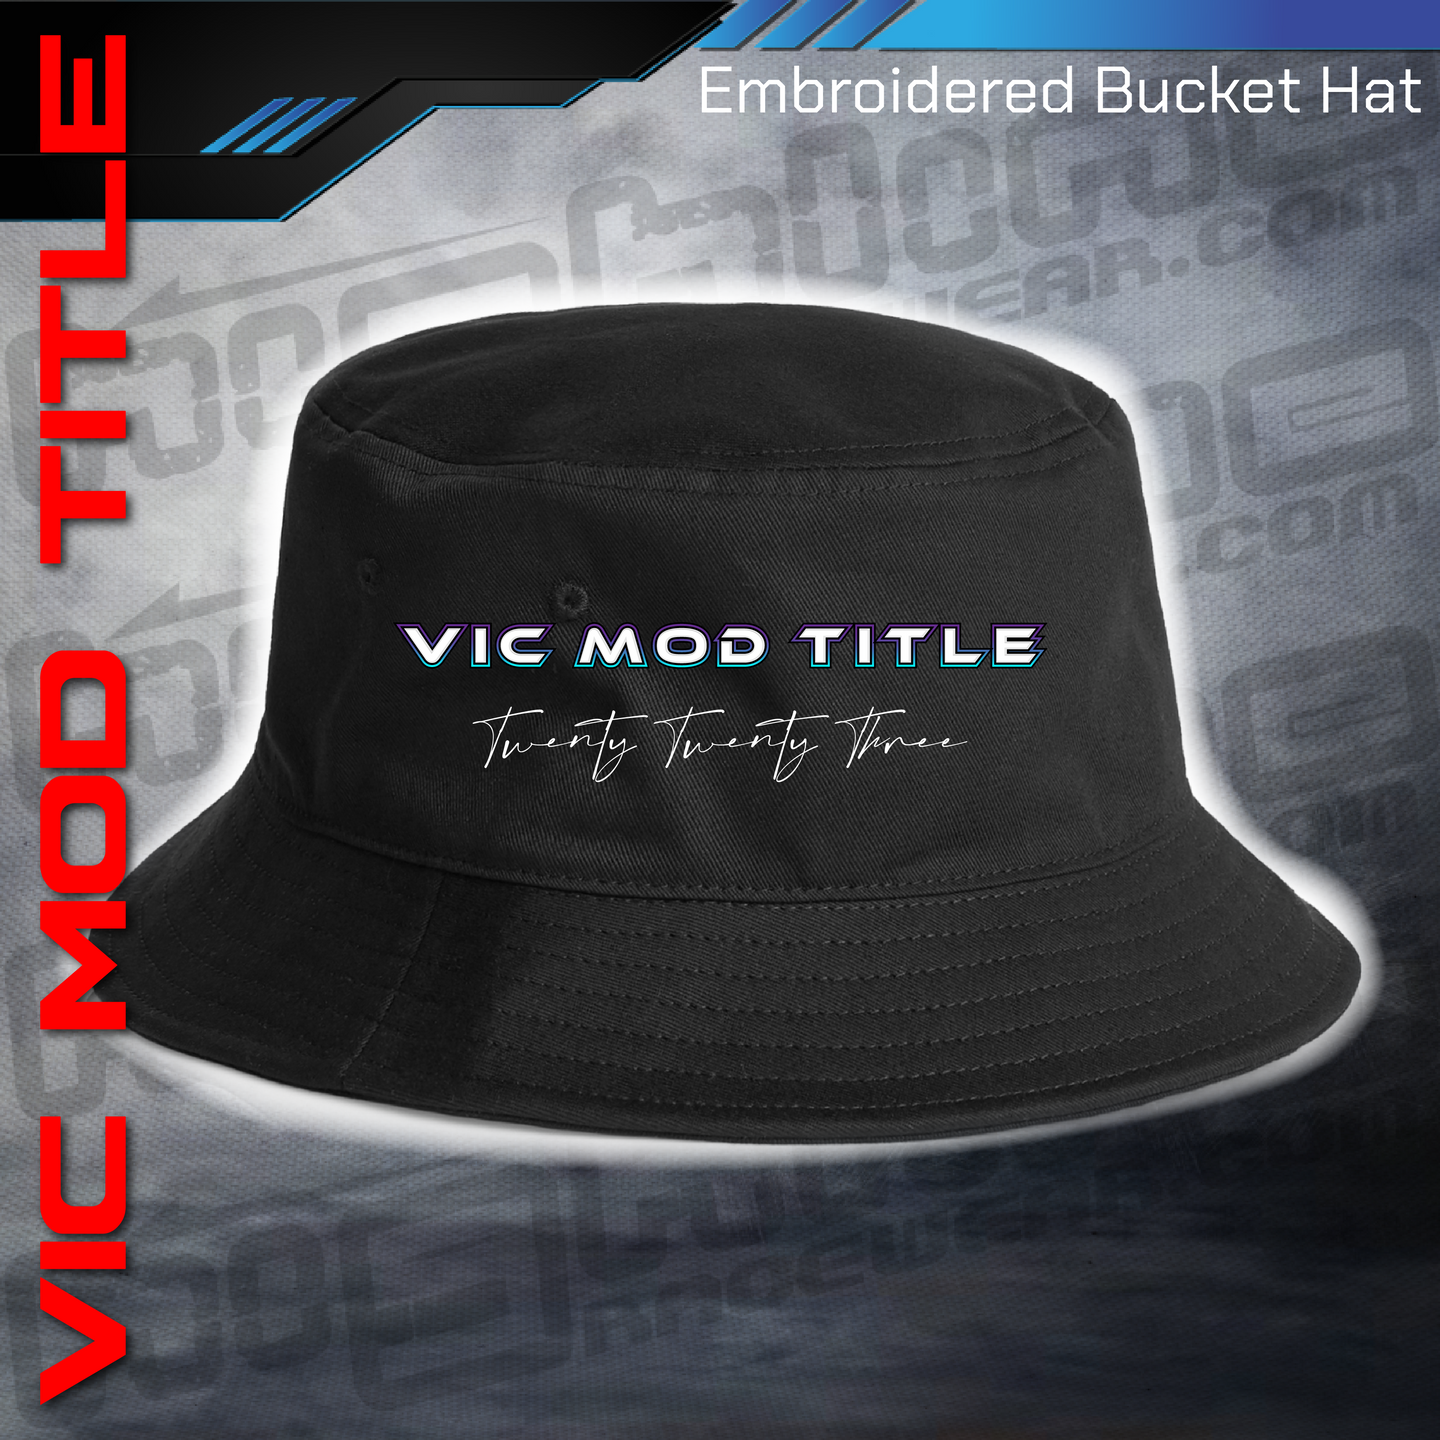 Embroidered Bucket Hat - Victorian Modified Sedan Title 2023